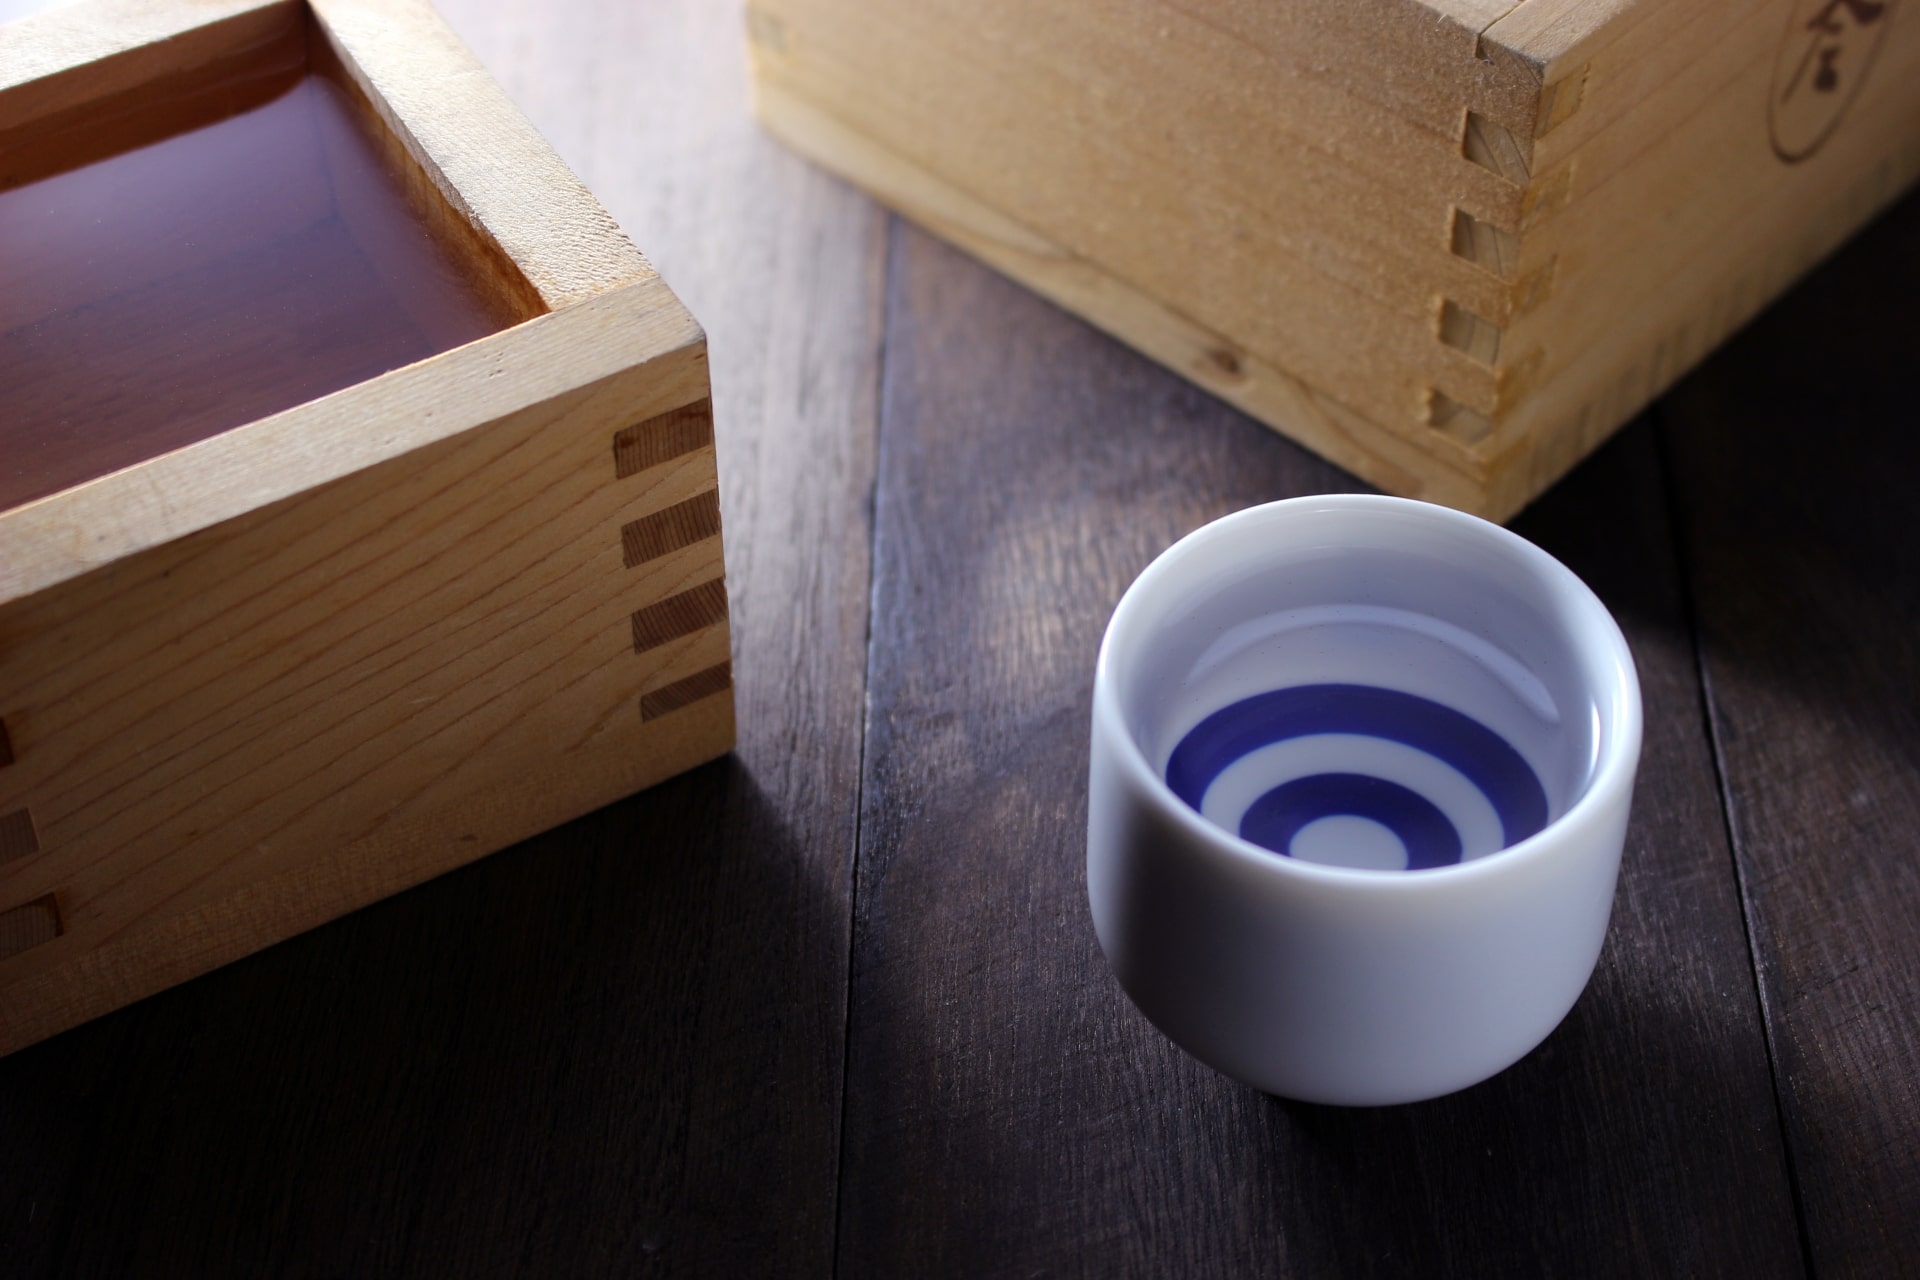 What are Japanese Sake Sets? 9 Things You Should Know – Japan